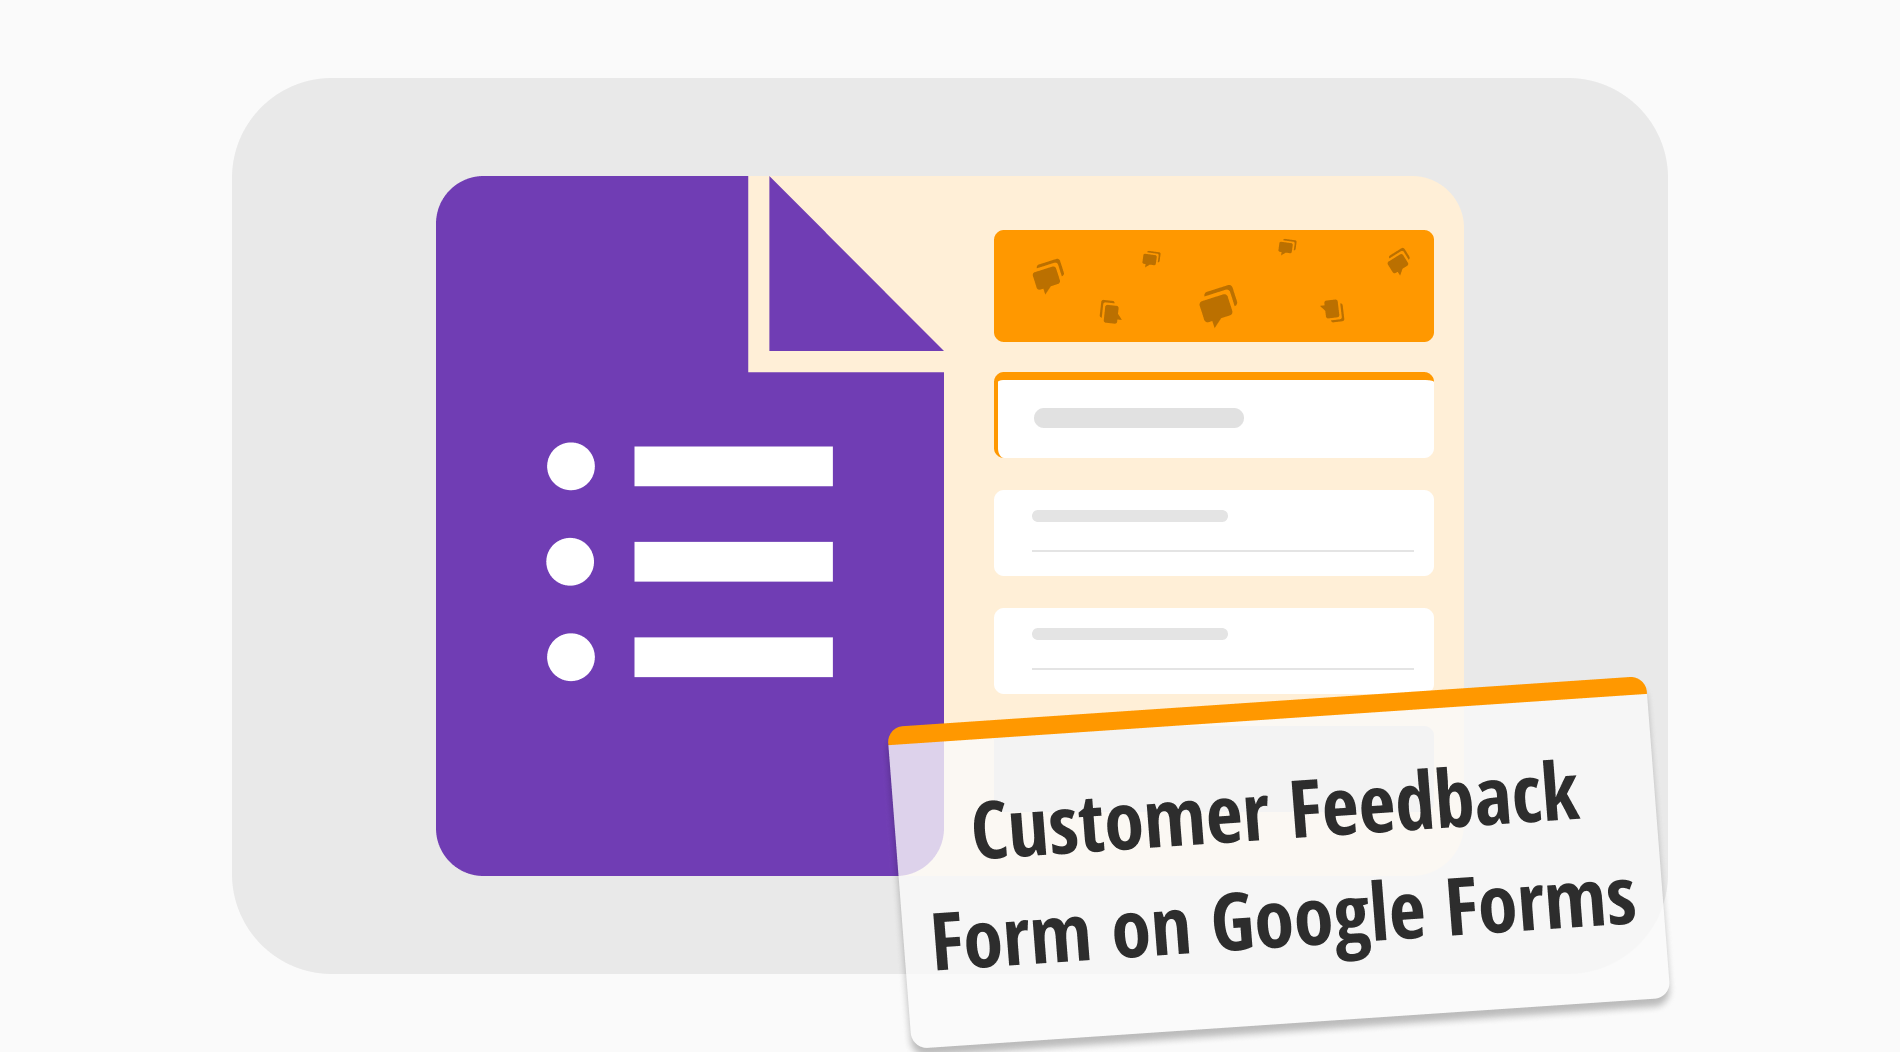 How to create customer feedback form on Google Forms